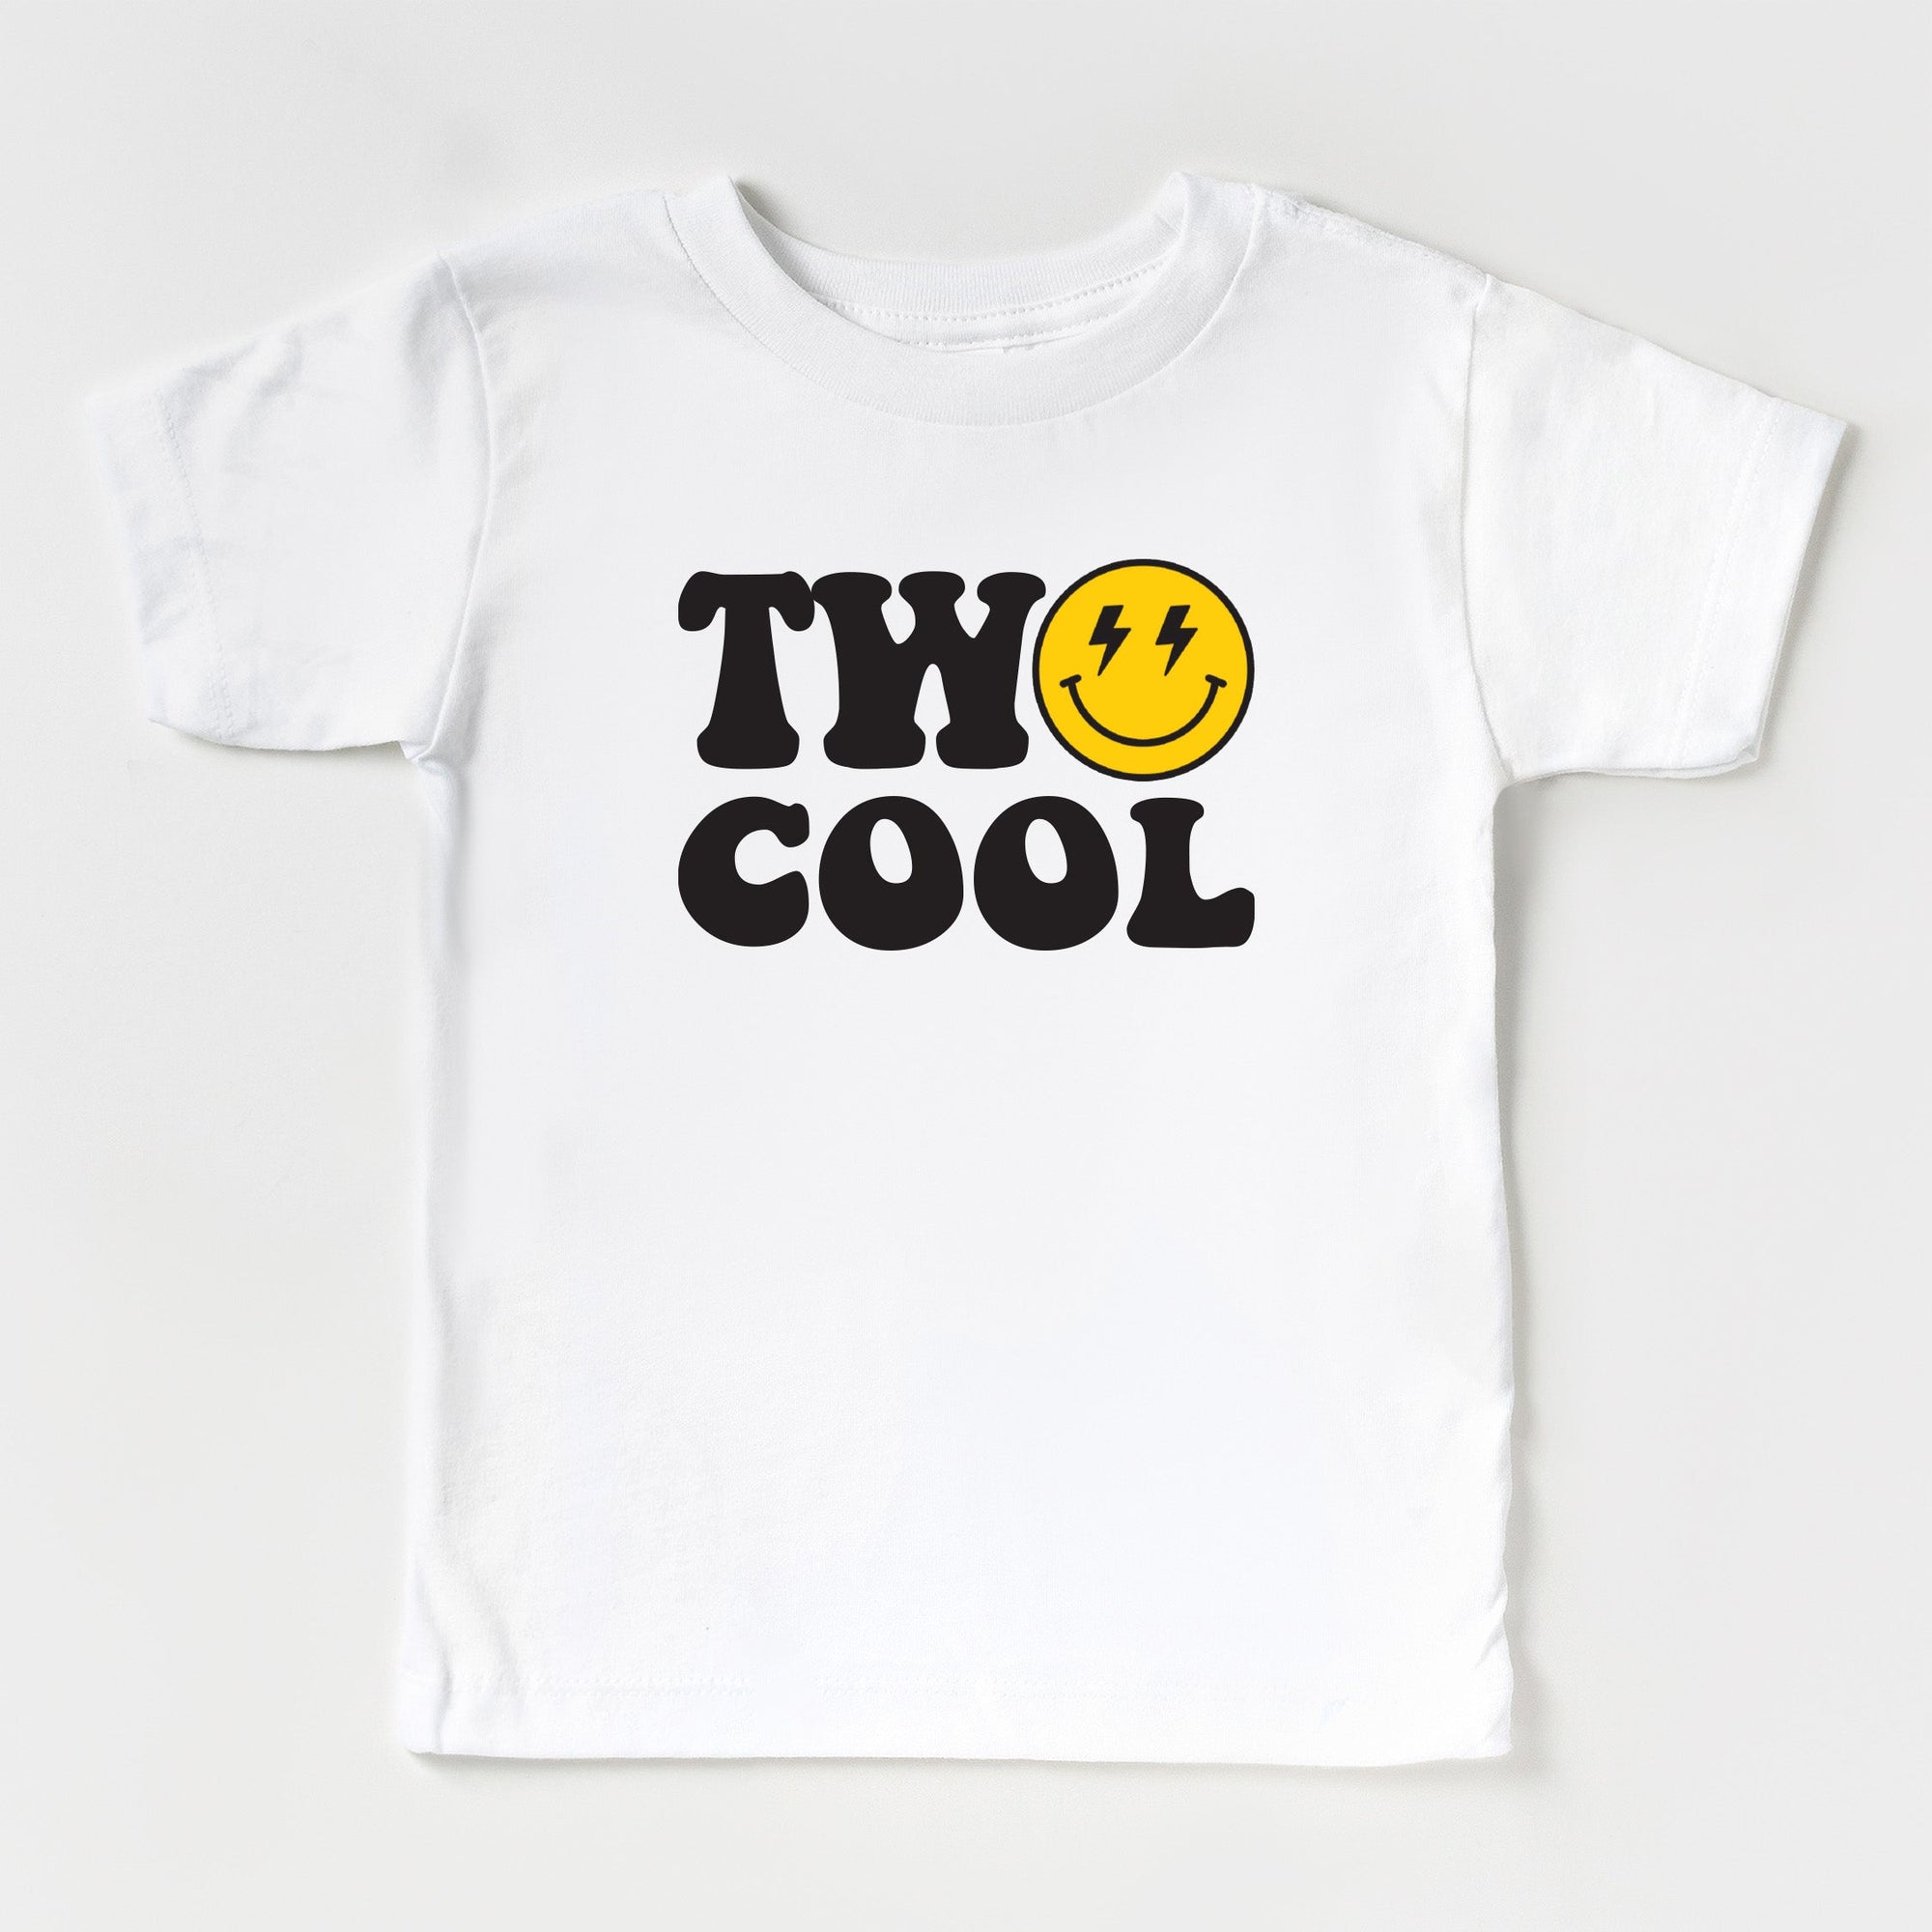 Cuddle Sleep Dream Baby & Toddler Tops Short Sleeve / 18m Two Cool | Happy 2nd Birthday Shirt